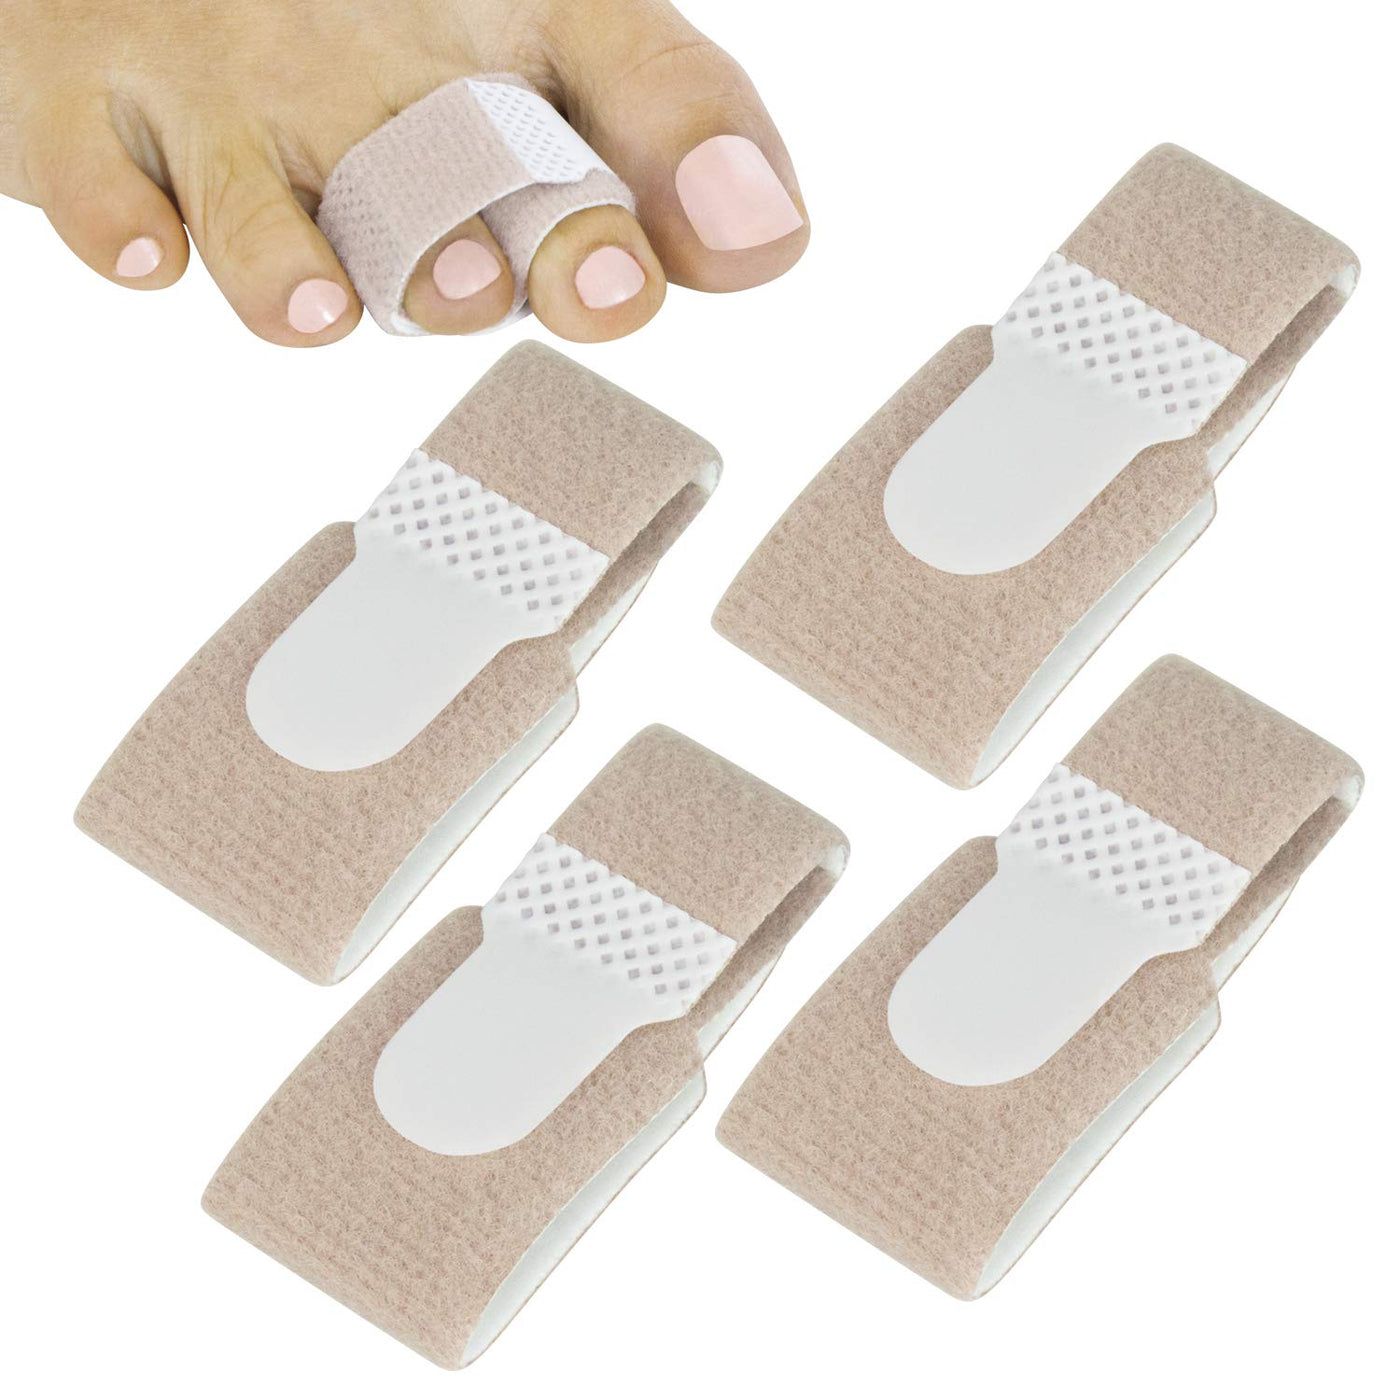 Toe Spacers - Gel Separators for Crooked Toe Alignment - Vive Health